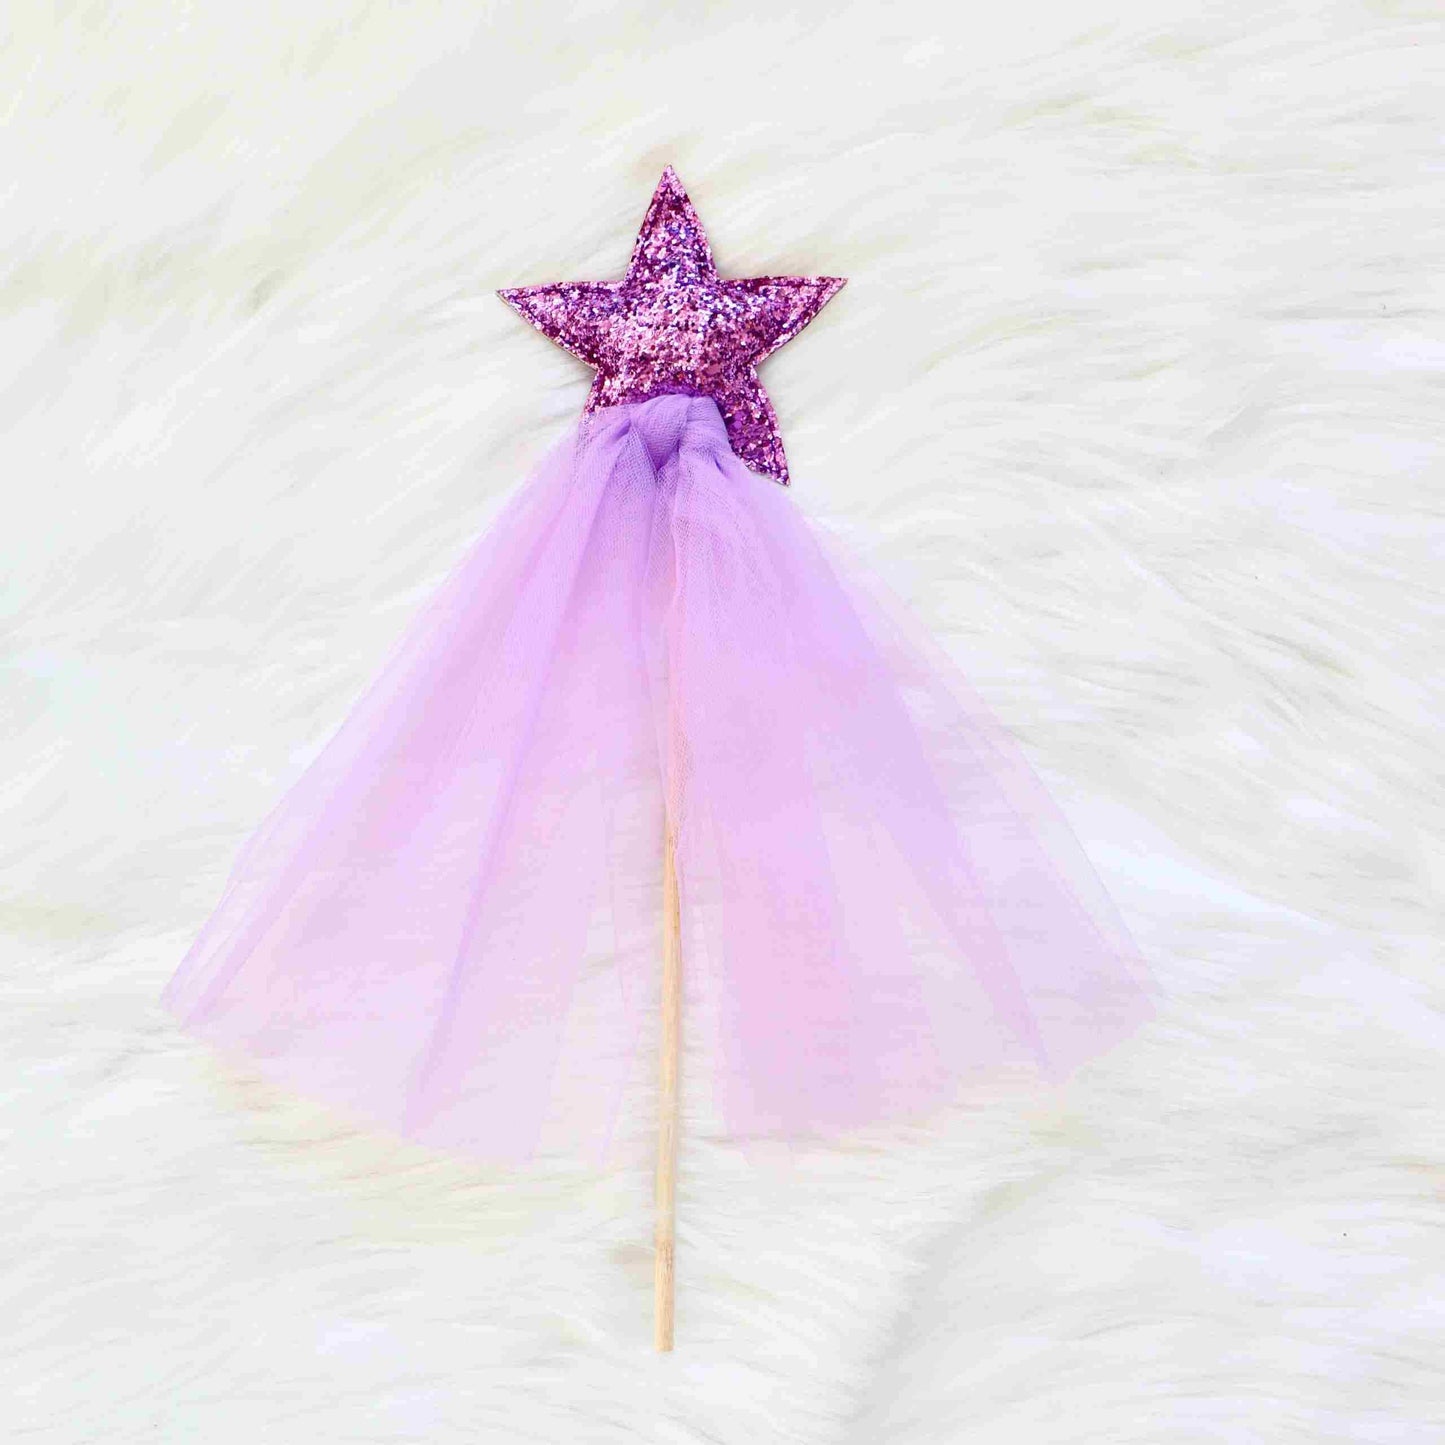 a purple dress with a pink star on it